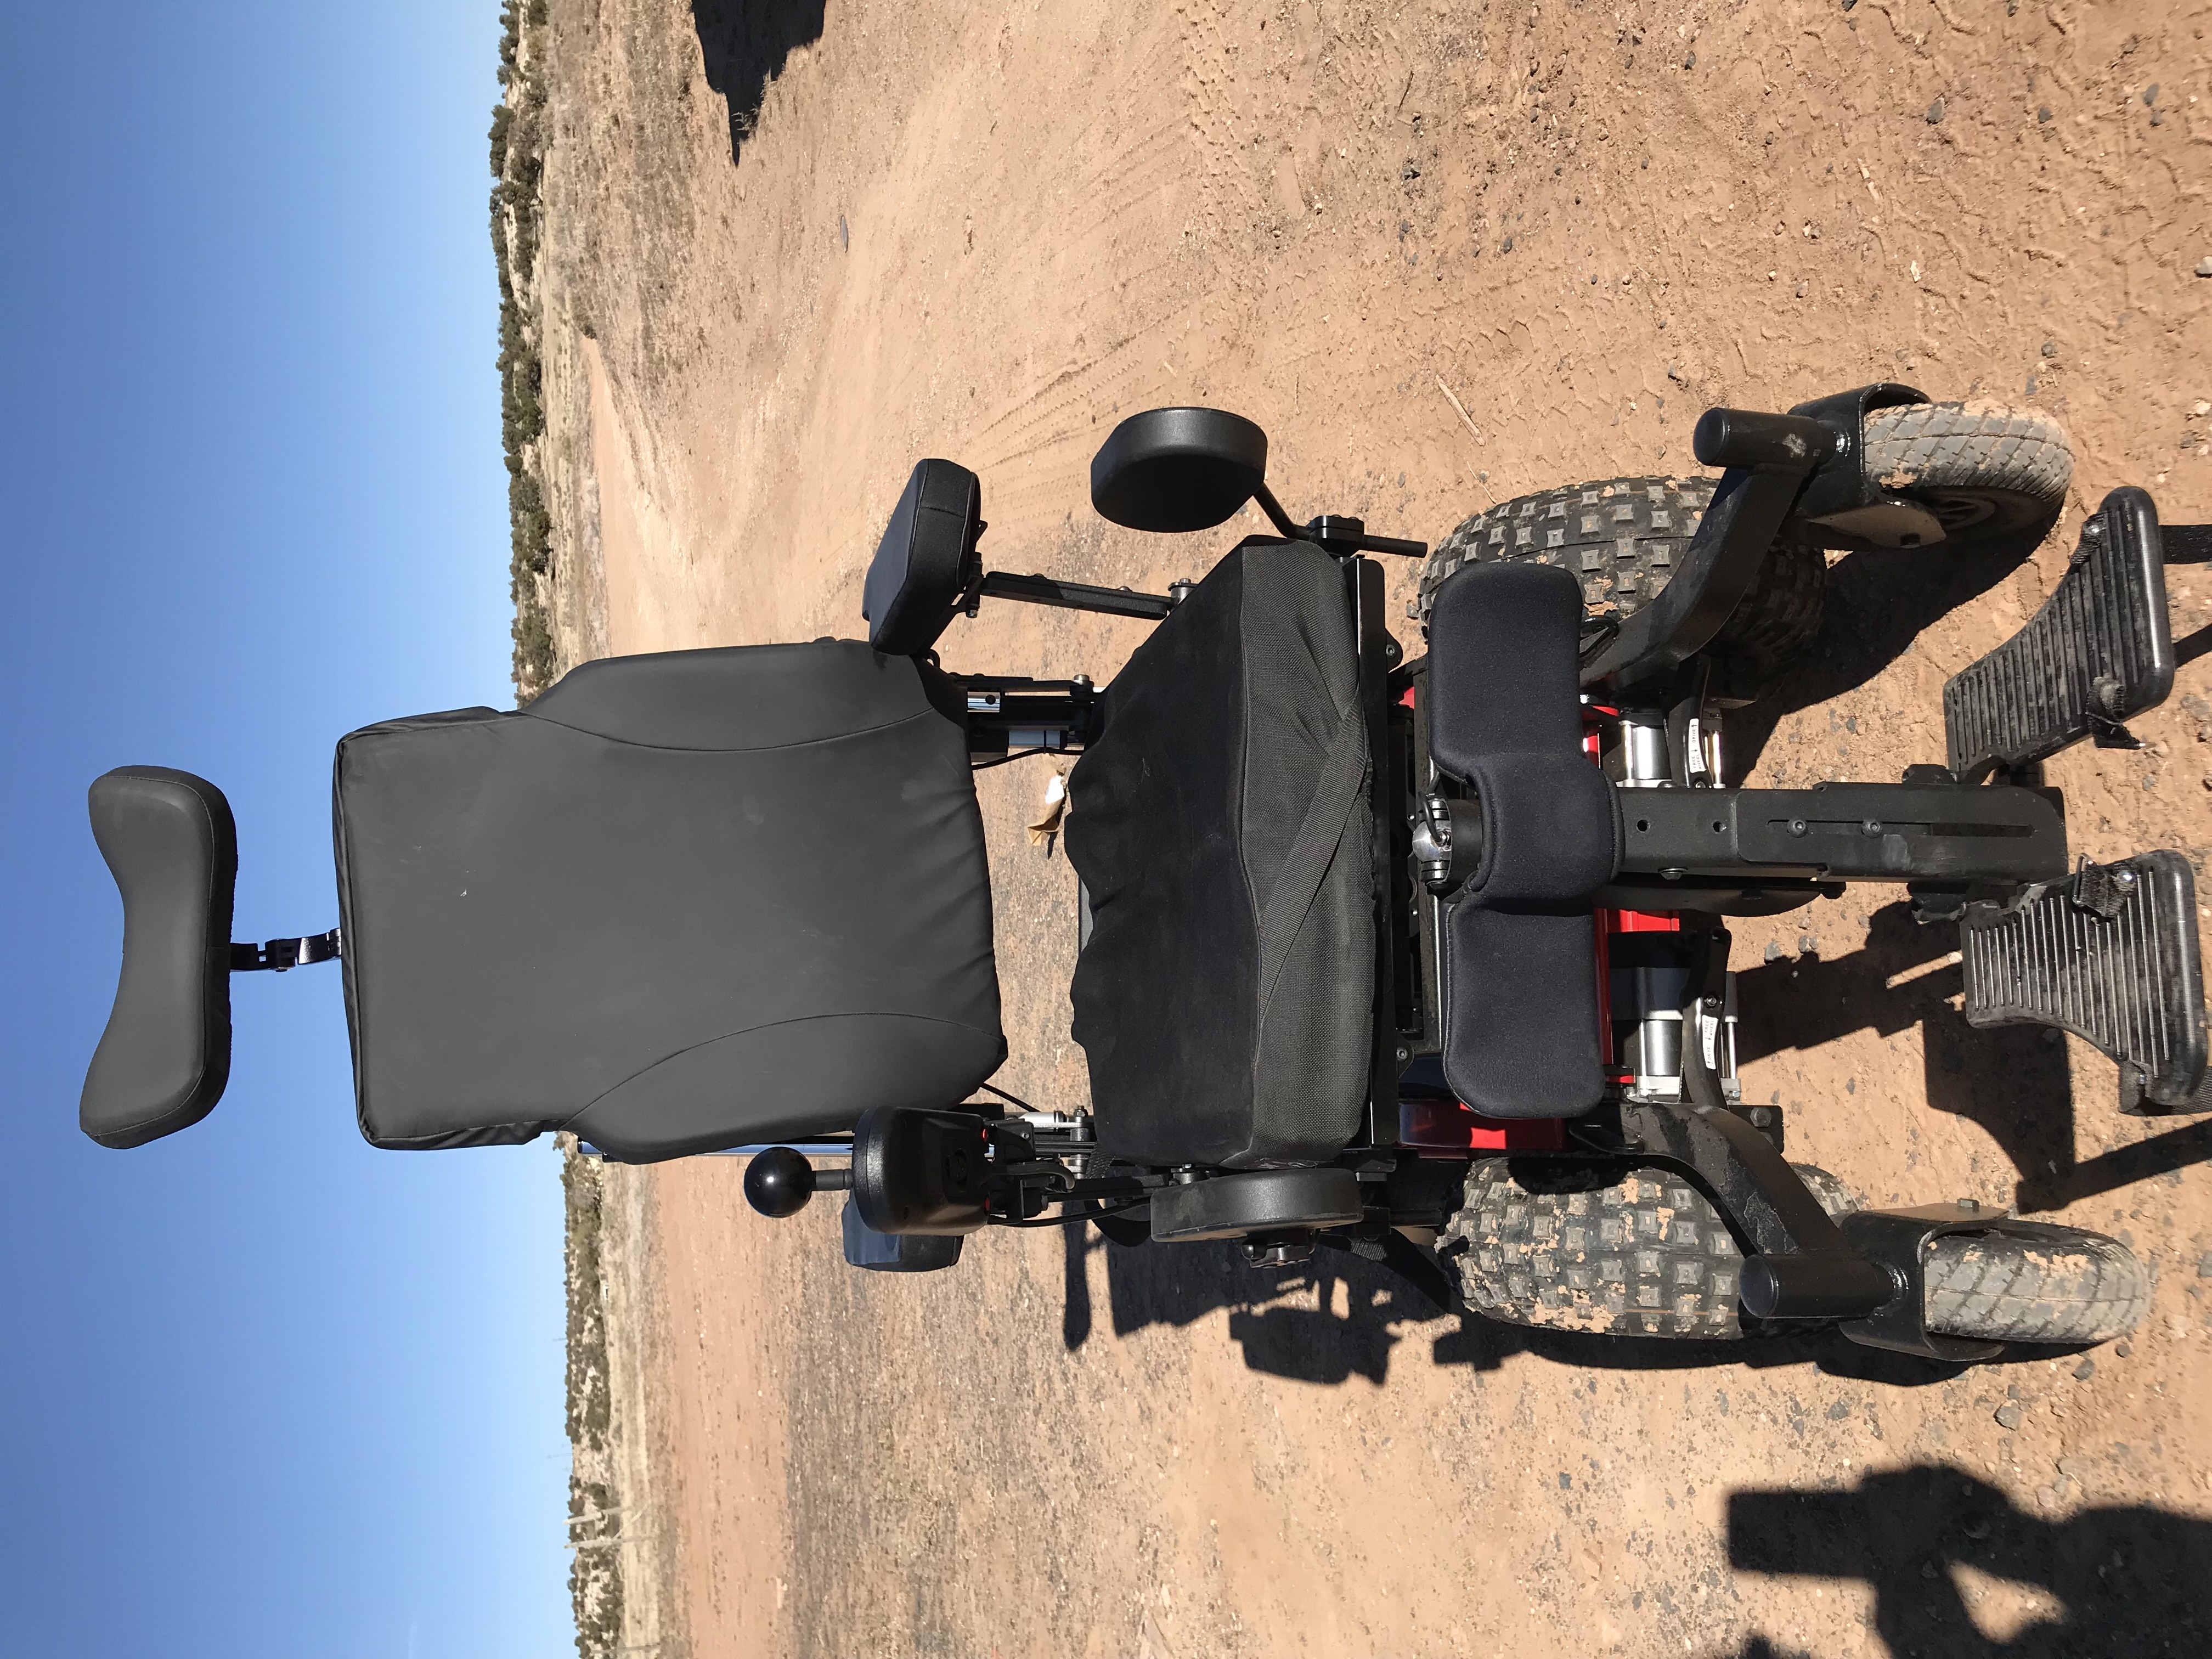 V6 Frontier Off Road Powerchair - Buy & Sell Used Electric Wheelchairs, Mobility ...